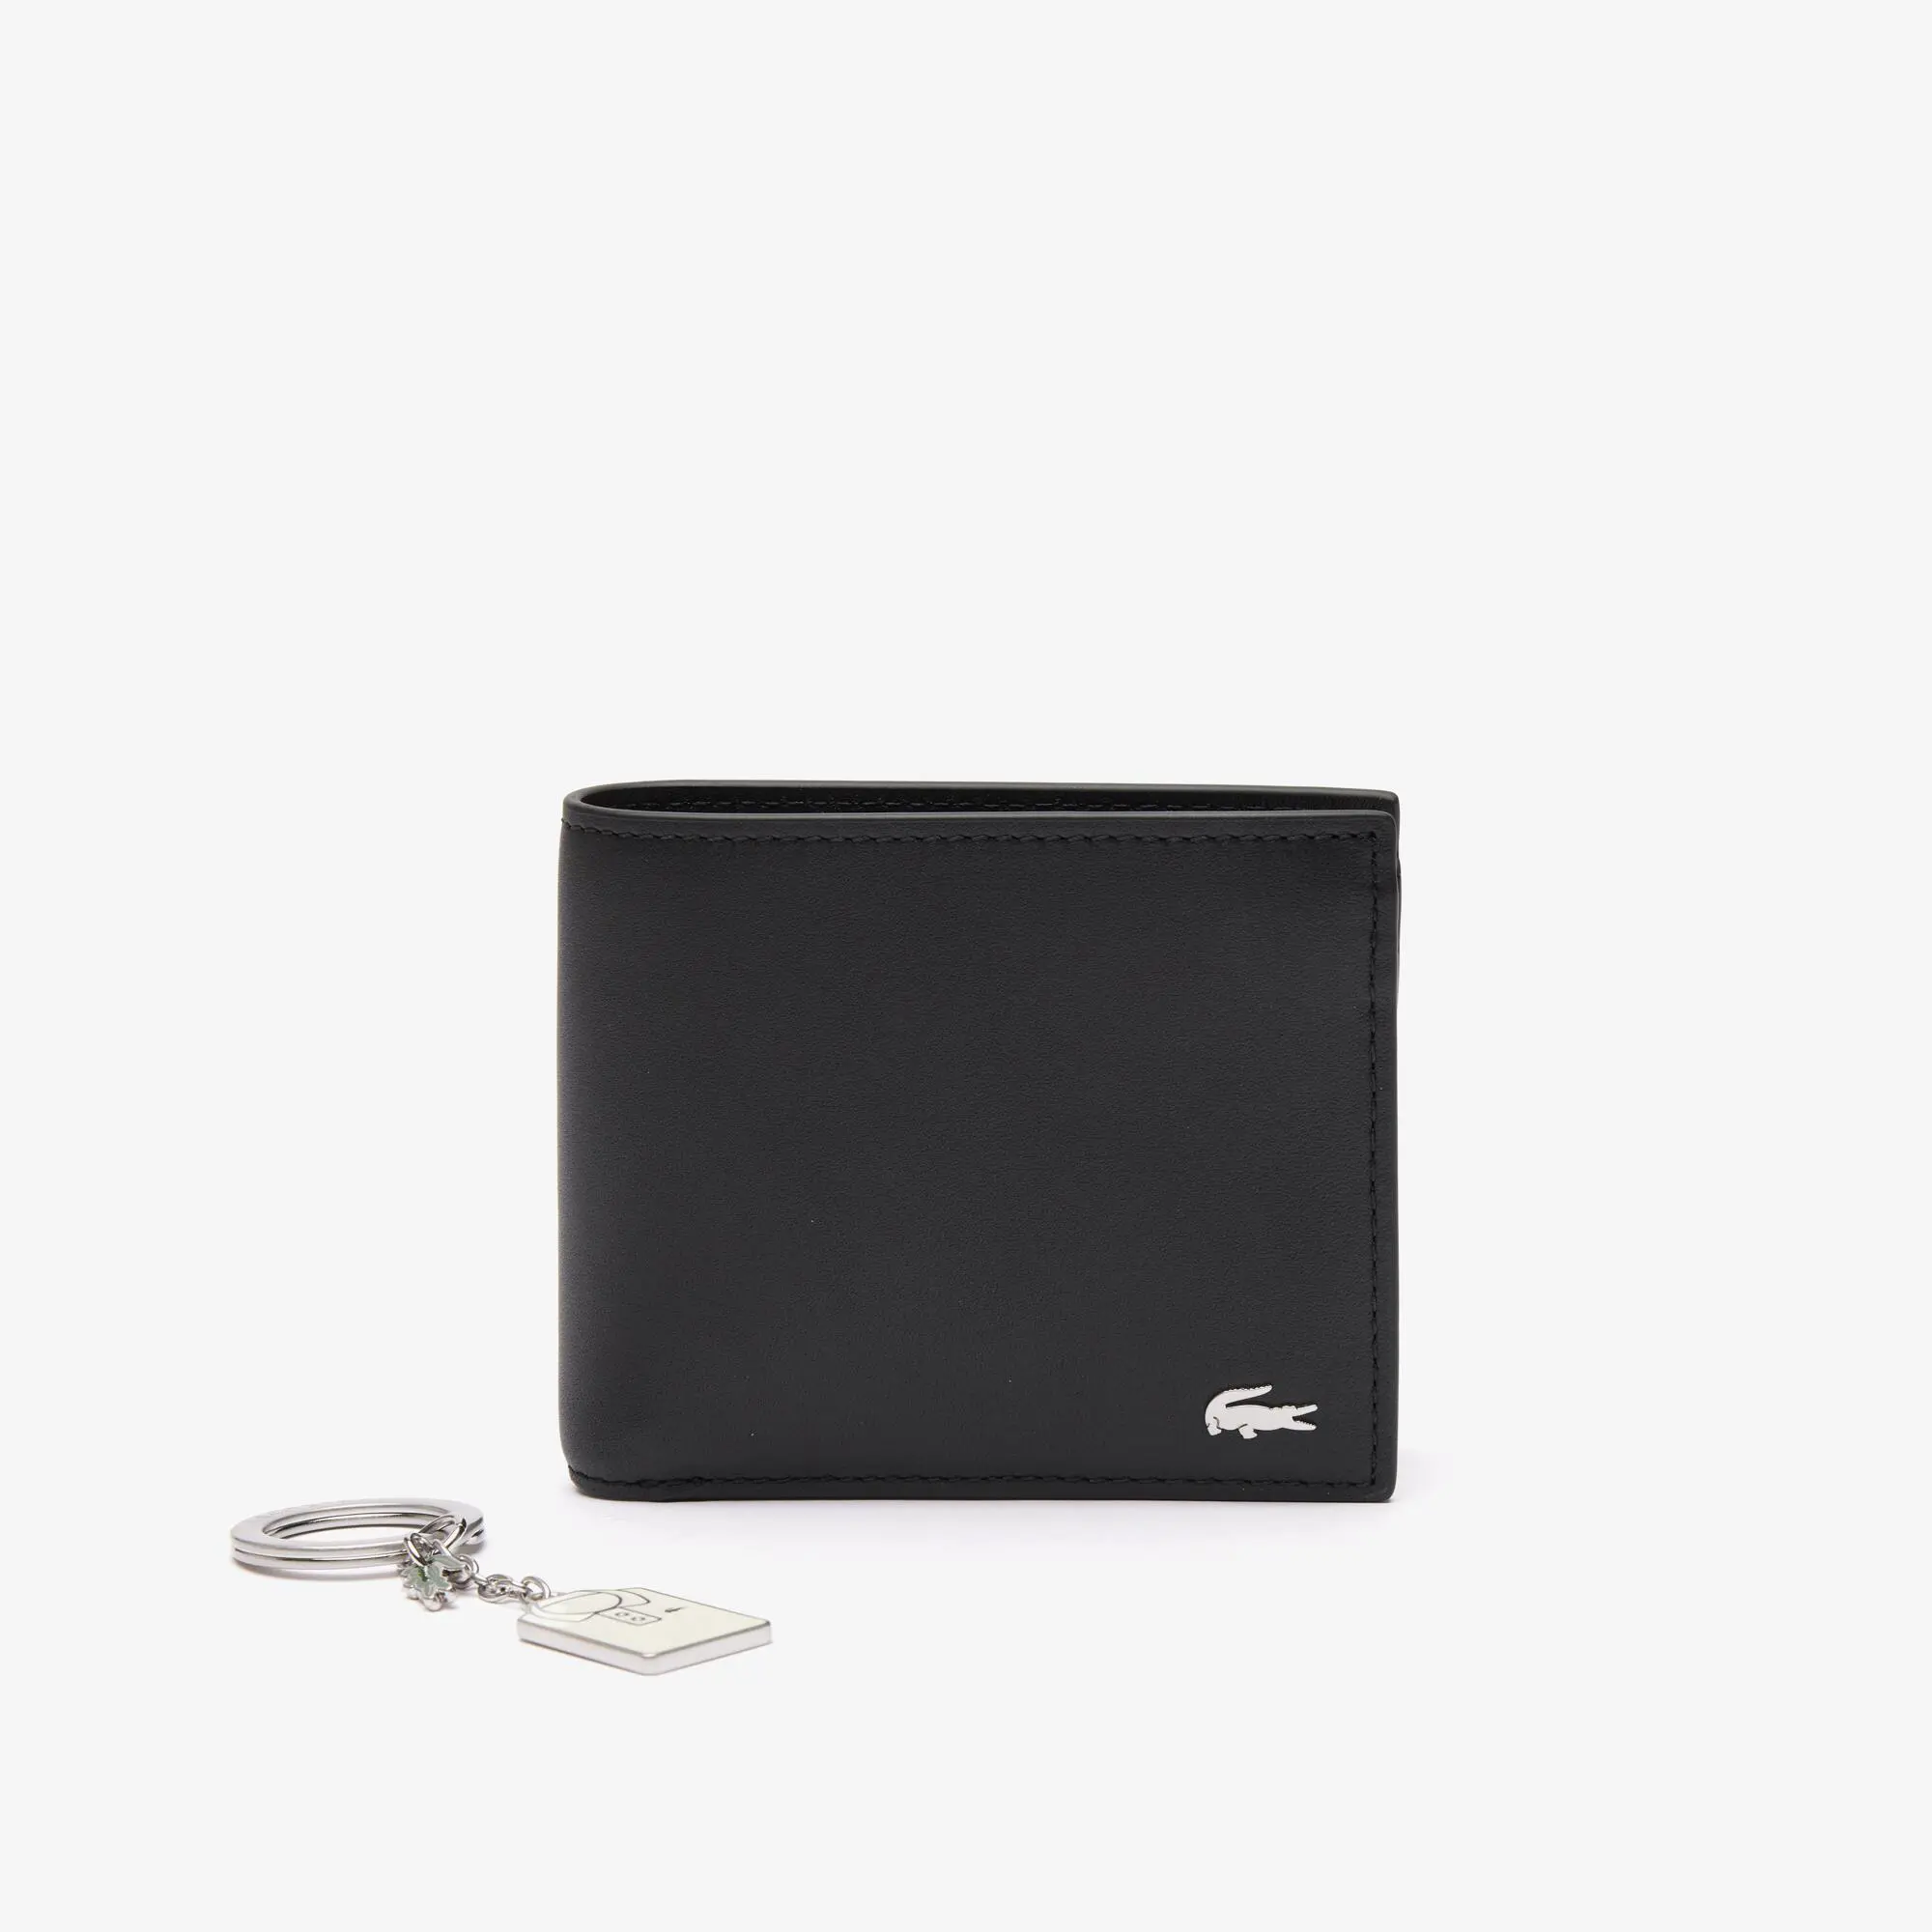 Lacoste Wallet and Polo Key Chain Gift Set. 1